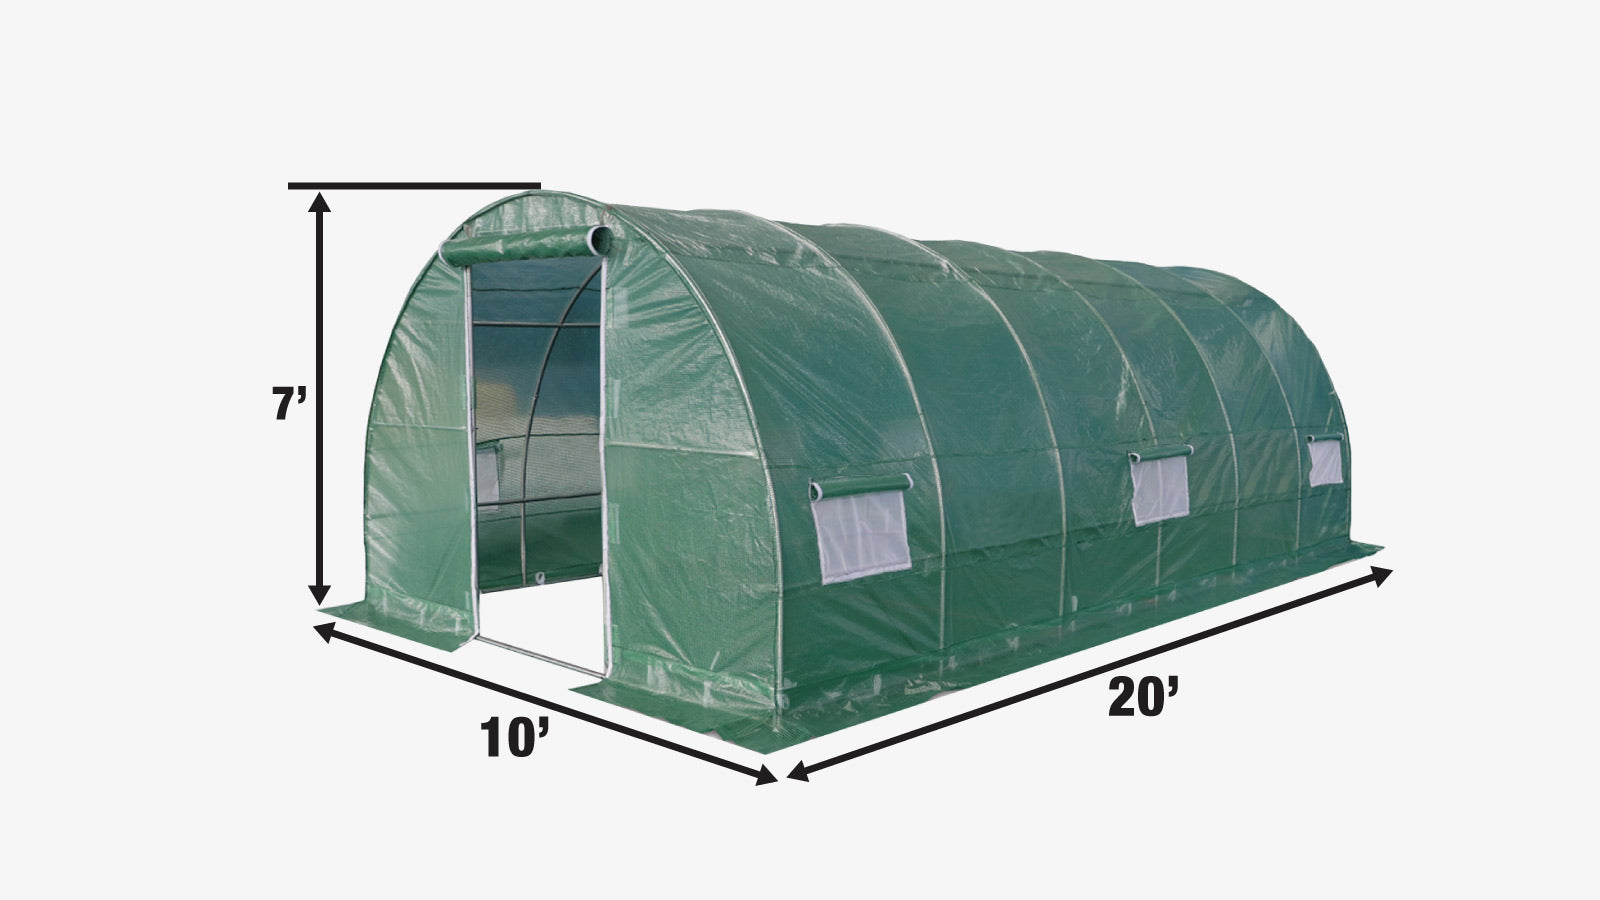 TMG Industrial 10' x 20' Tunnel Greenhouse Grow Tent with Ripstop Leno Cover, Cold Frame, Roll-Up Mesh Windows, Round Top Roof, TMG-GH1020R-specifications-image